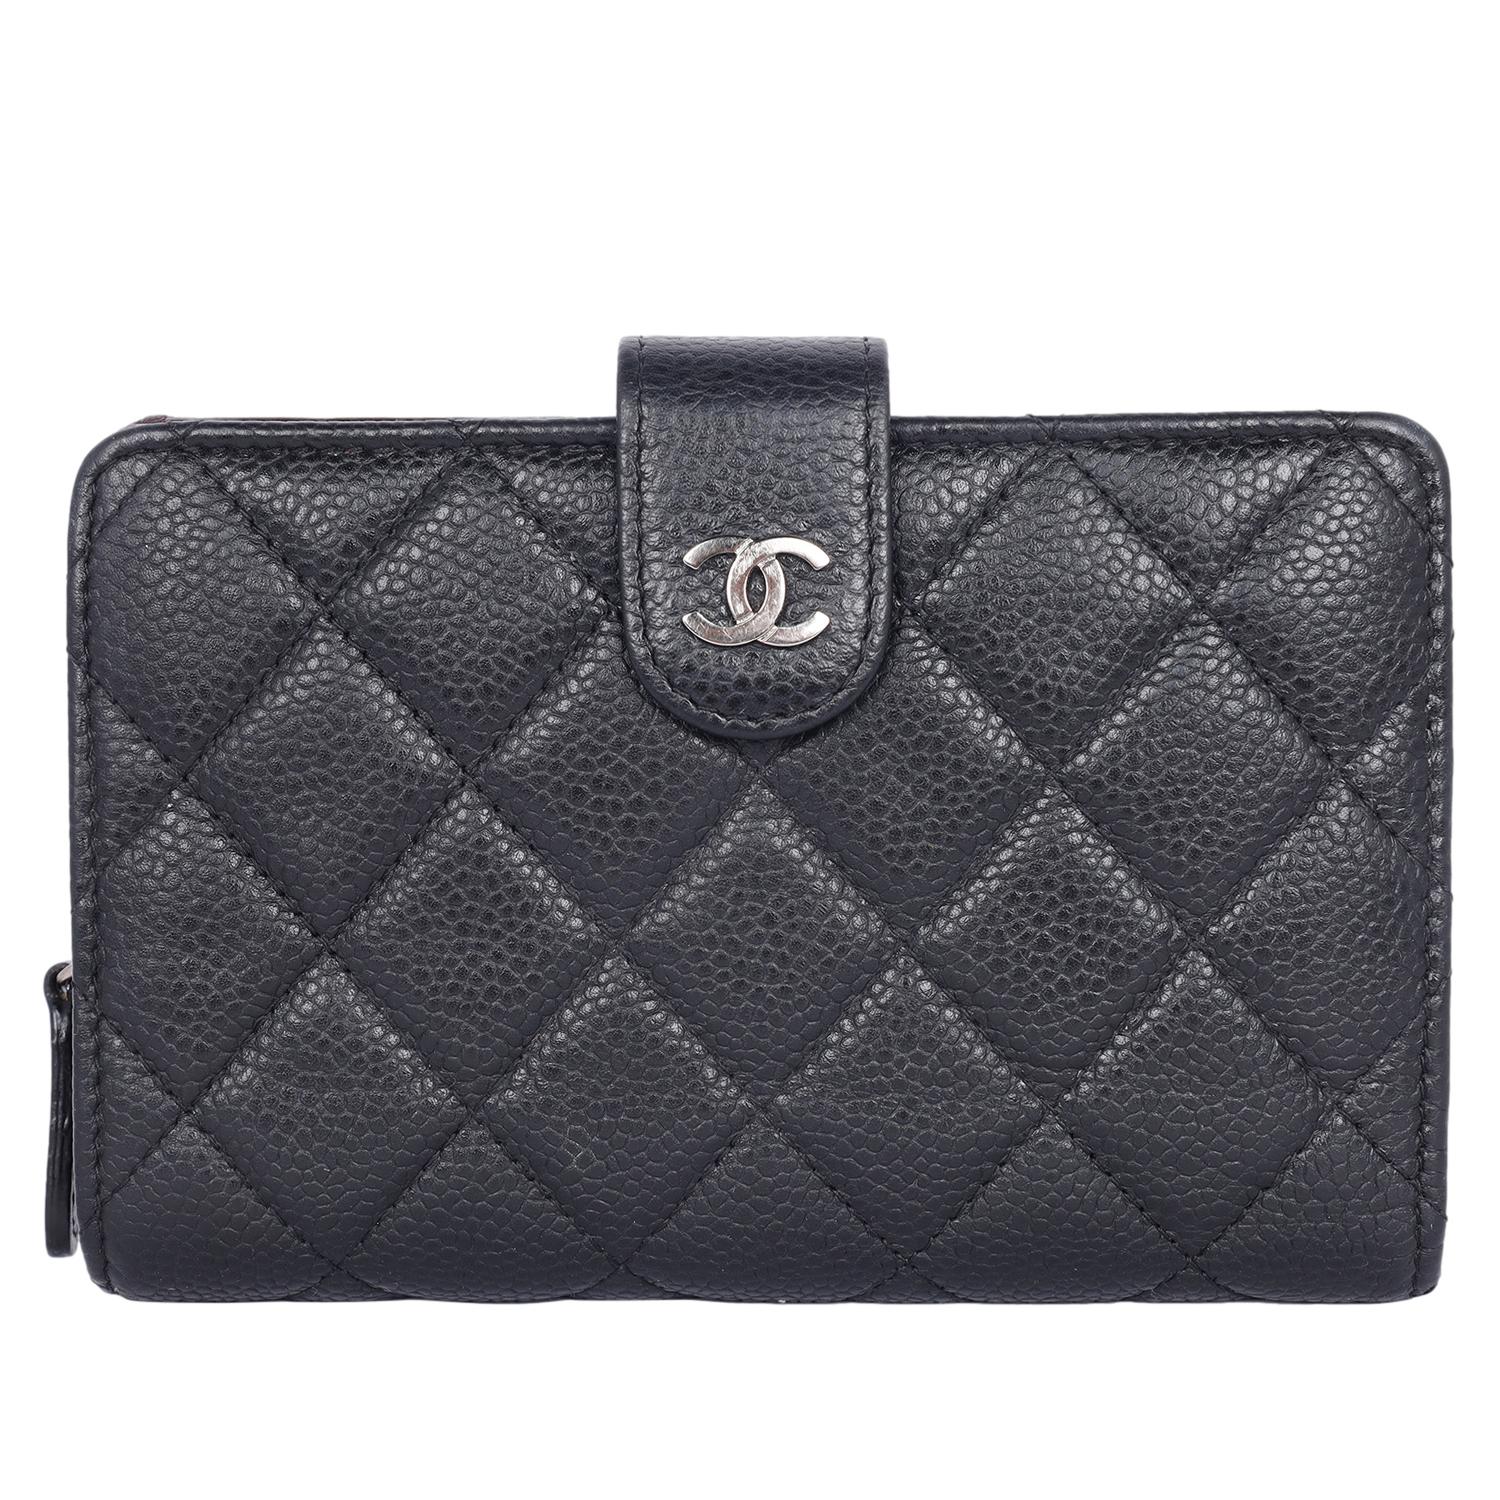 Authentic, pre-loved Chanel classic black caviar quilted French wallet. Features caviar leather, front cc silver snap closure with interior that has 10 cc slots, 3 pockets, billfold and zipper back pocket with slip rear pocket.

Authenticity